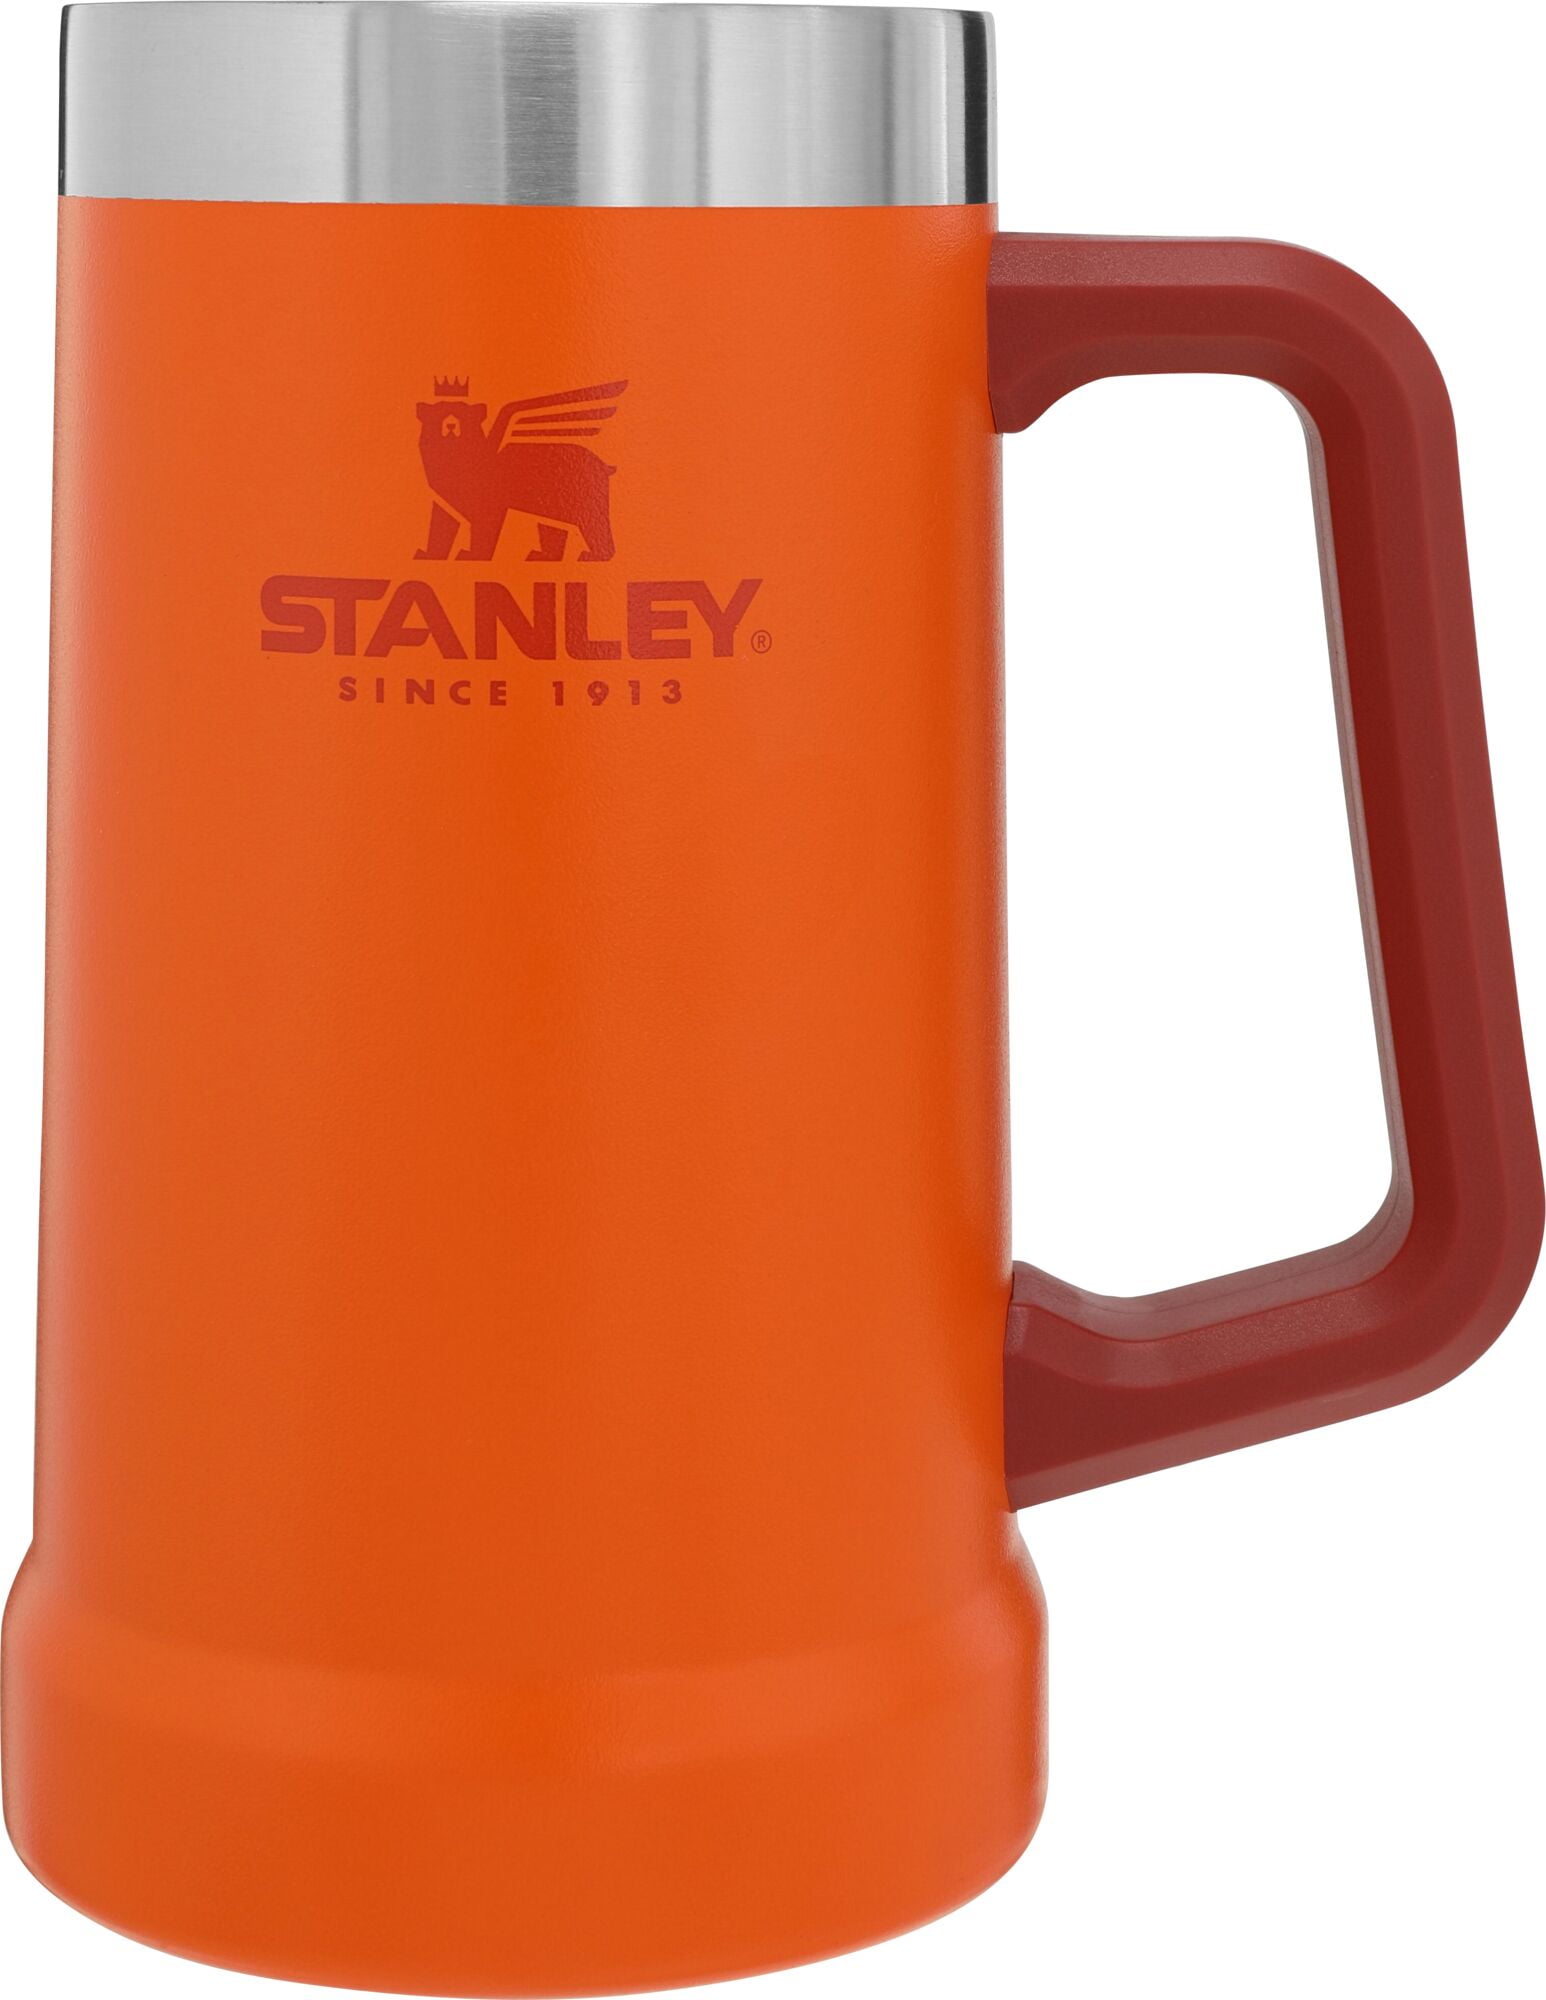 STANLEY Adventure Vacuum Steel Stein Mug Insulated Camping Cup 24 oz NEW!